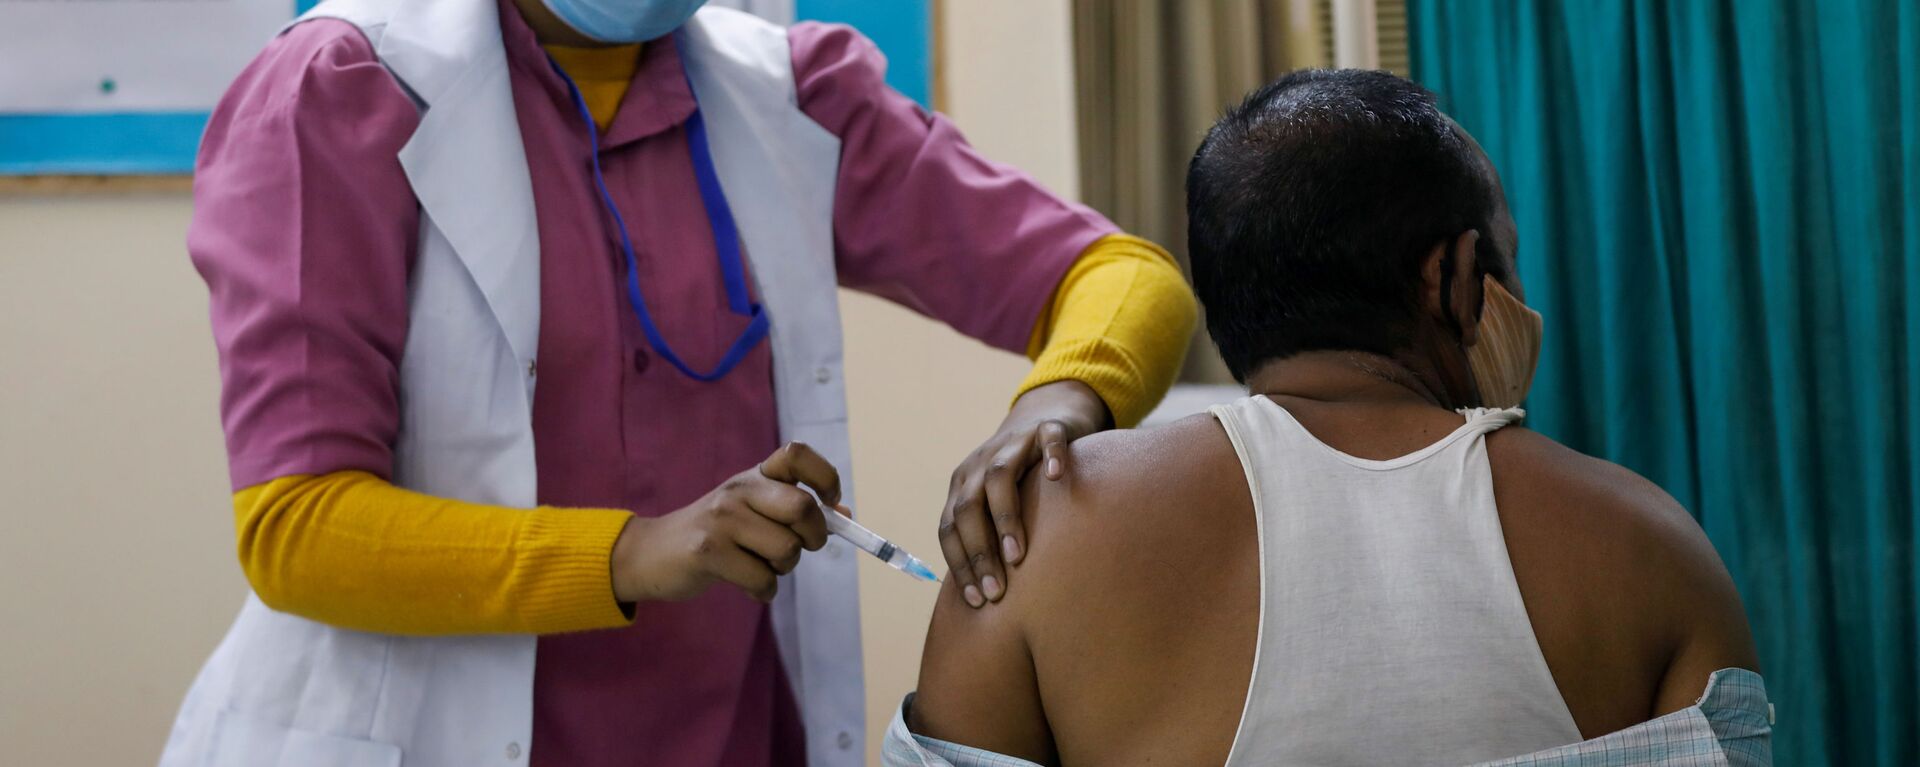  A man receives a Bharat Biotech's COVID-19 vaccine called COVAXIN, at a vaccination centre, in New Delhi, India, February 13, 2021 - Sputnik International, 1920